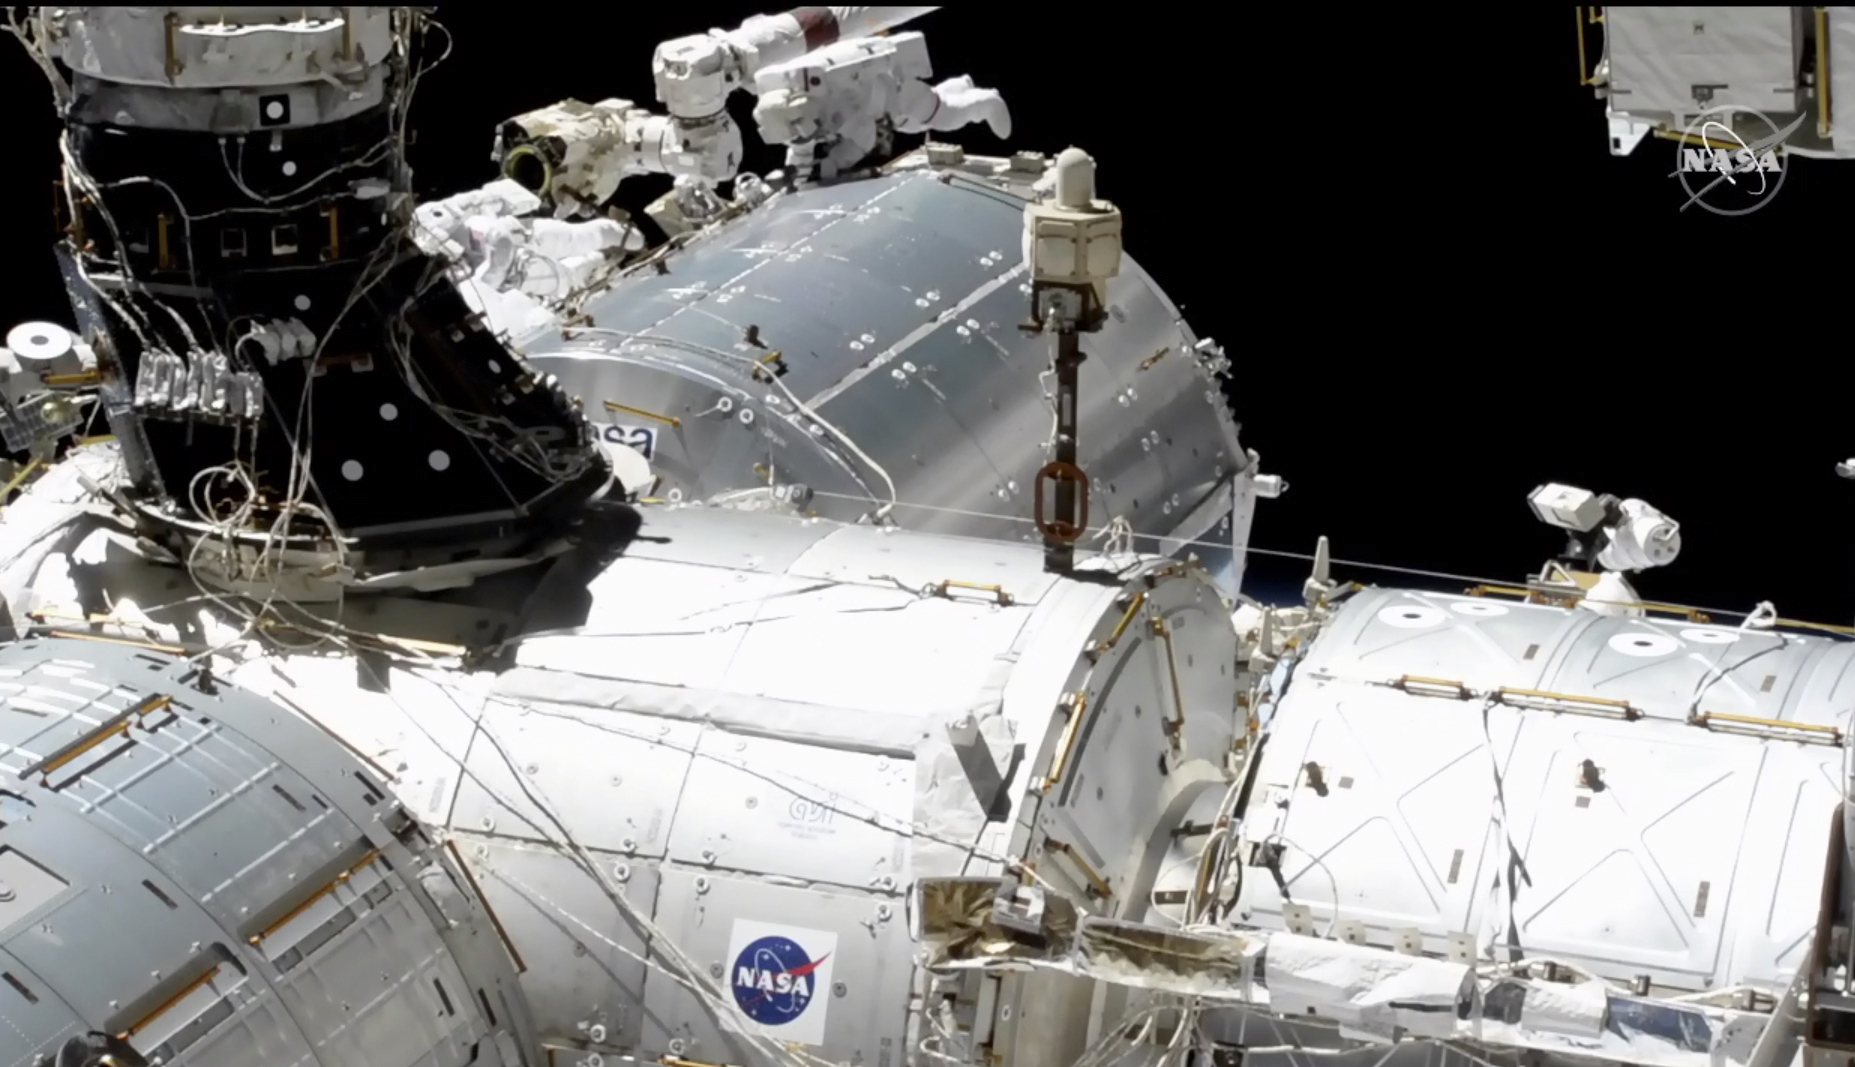 Cable Trouble Dogs Spacewalkers in European Lab Upgrades